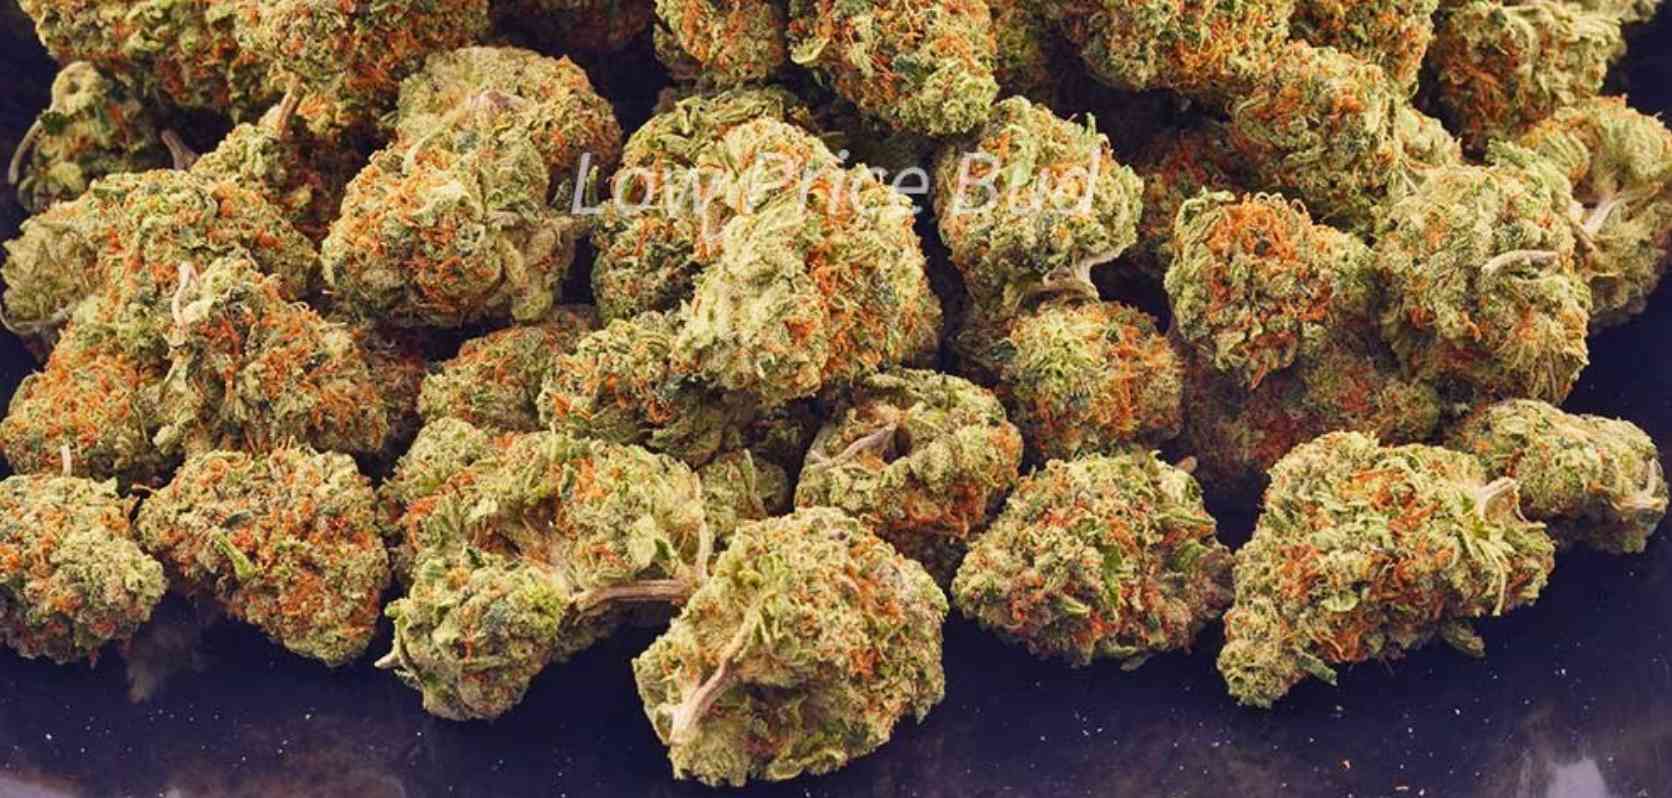 Buy Nuken weed online today from LowPriceBud, and we will deliver it straight to your doorstep anywhere in Canada!